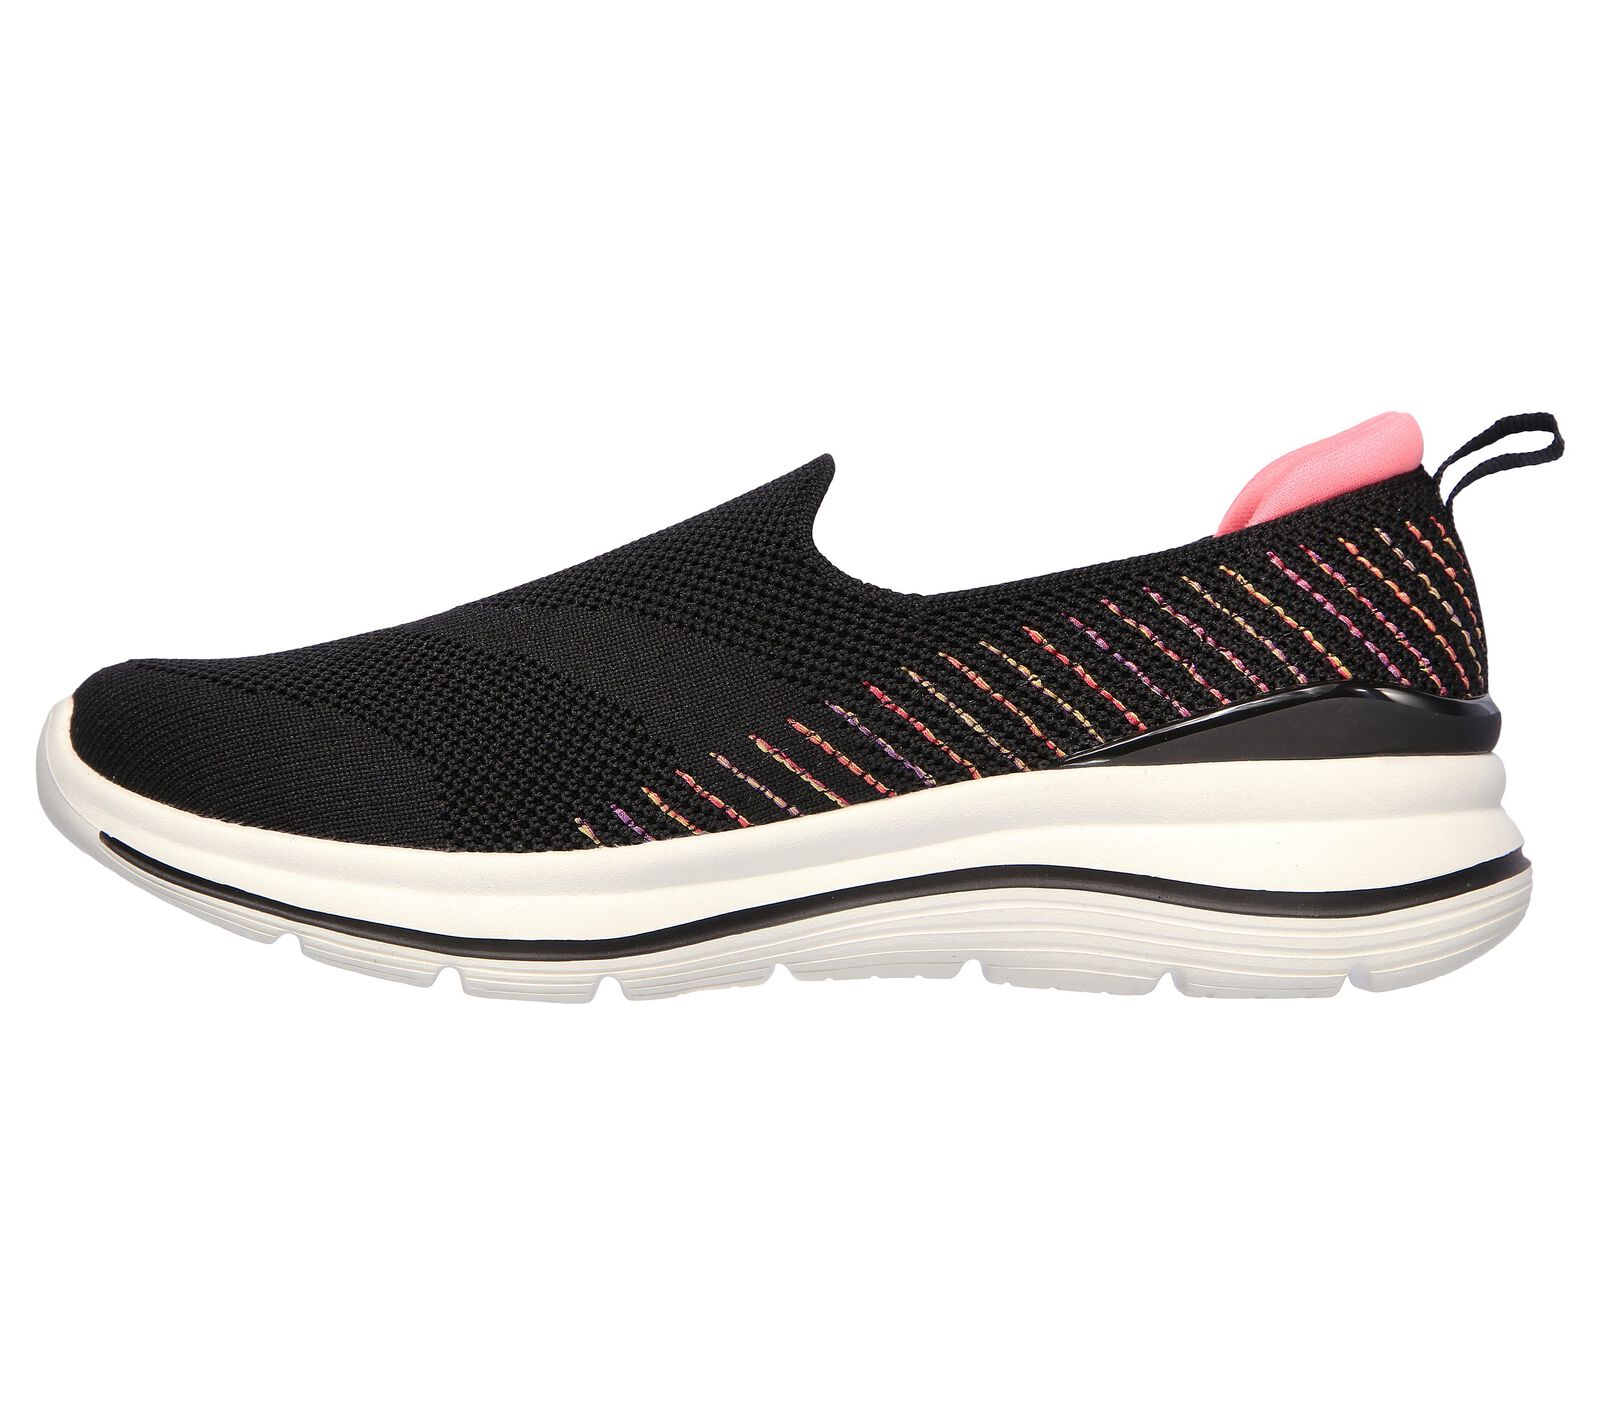 Shop the Skechers GOwalk Stretch Fit - Special Day | SKECHERS